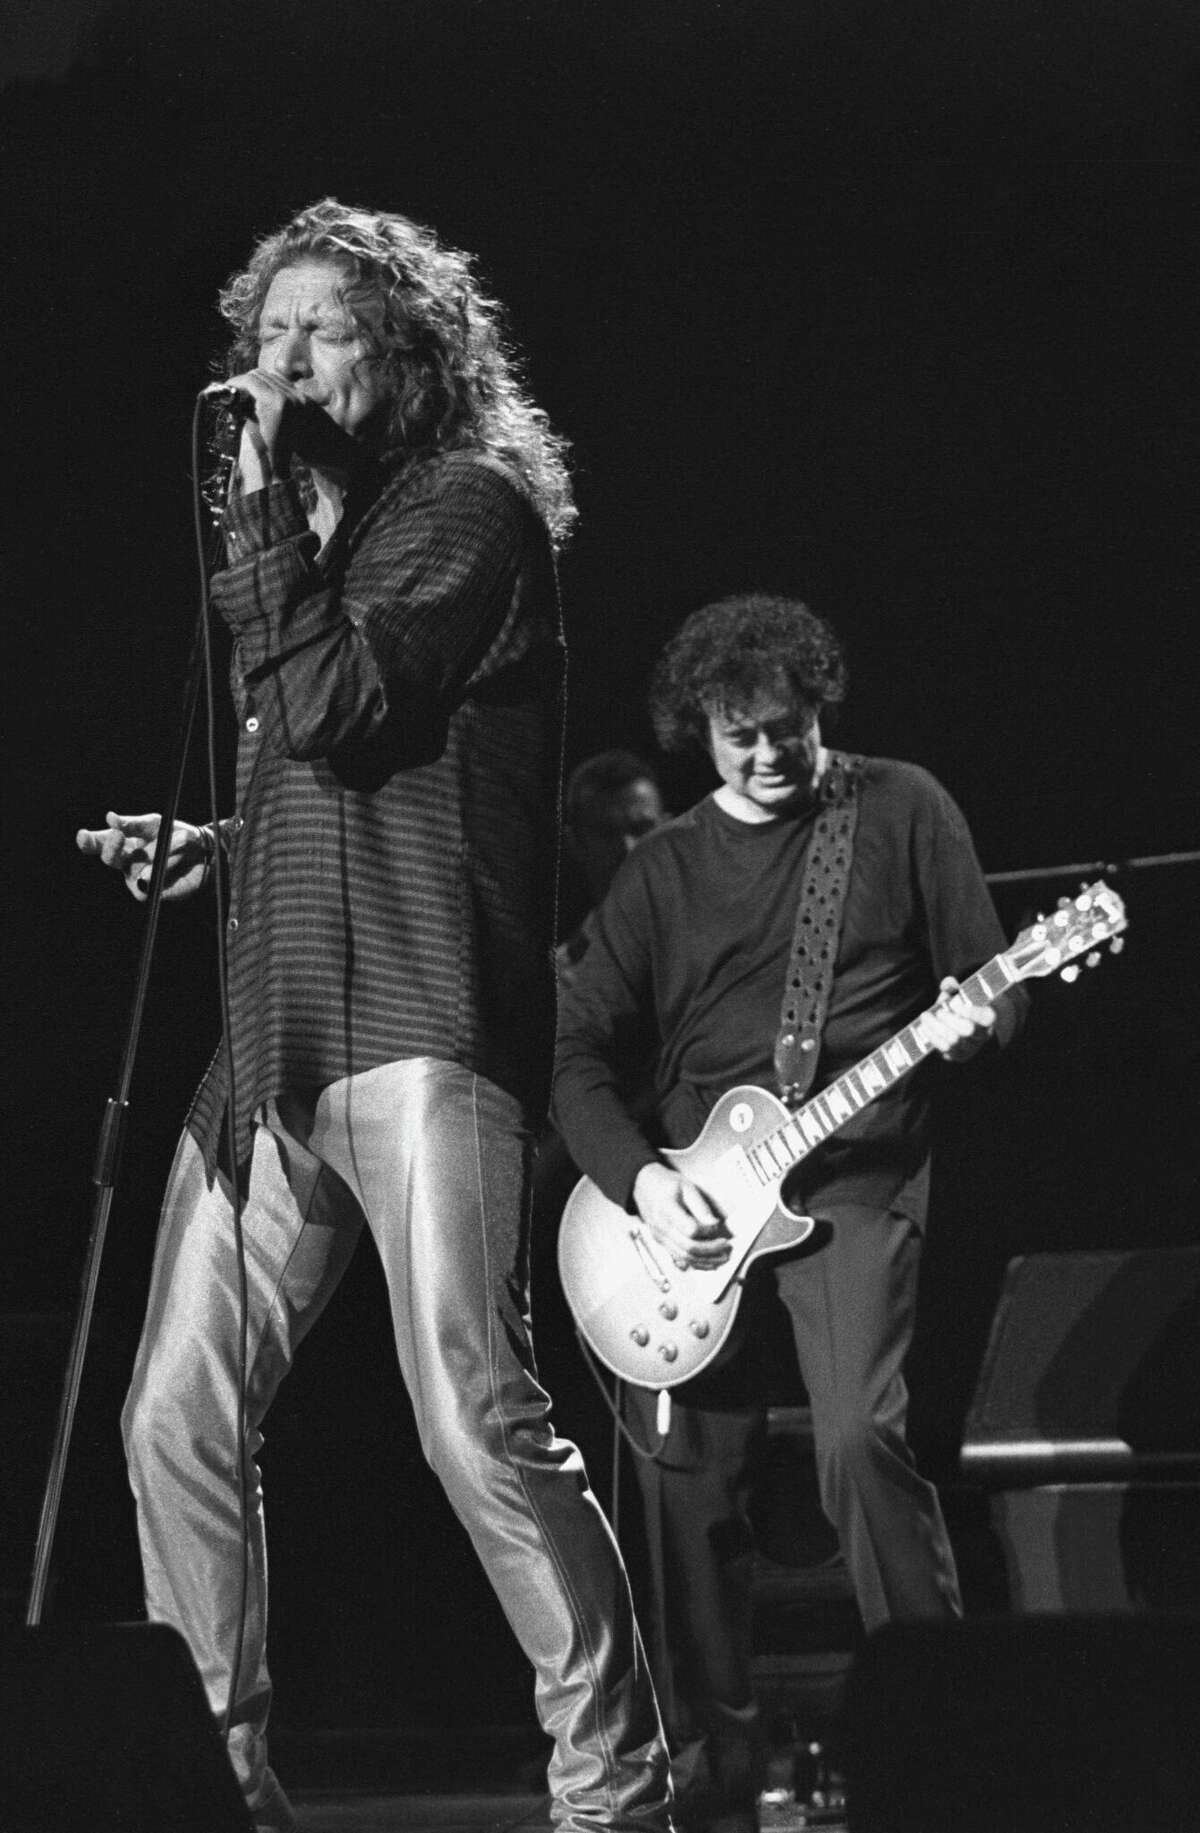 Singer Robert Plant and guitarist Jimmy Page are shown performing on stage during a concert appearance on October 21,1995 at the Hartford Civic Center. 